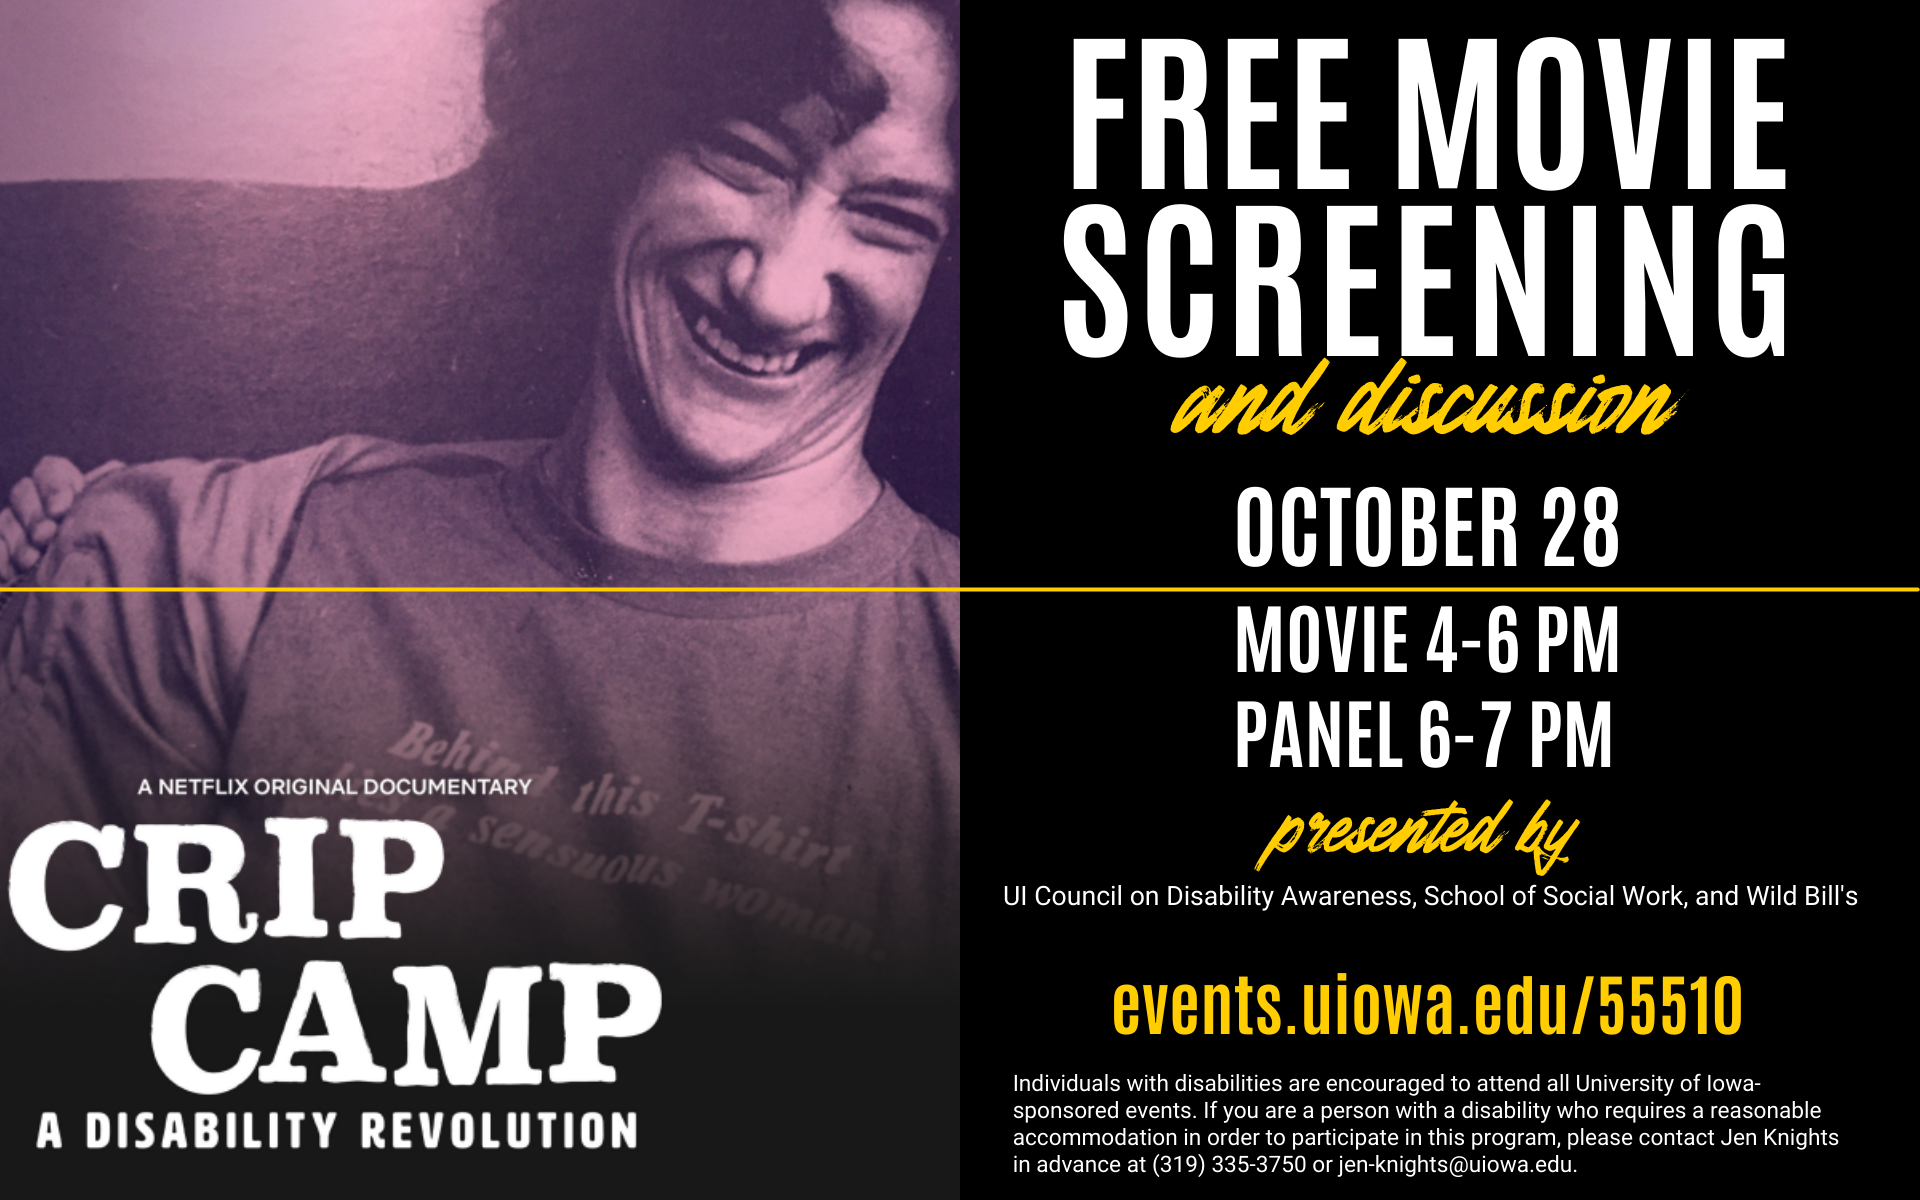 Free movie screening of Crip Camp. October 28. Movie 4-6 pm, discussion 6-7 pm.